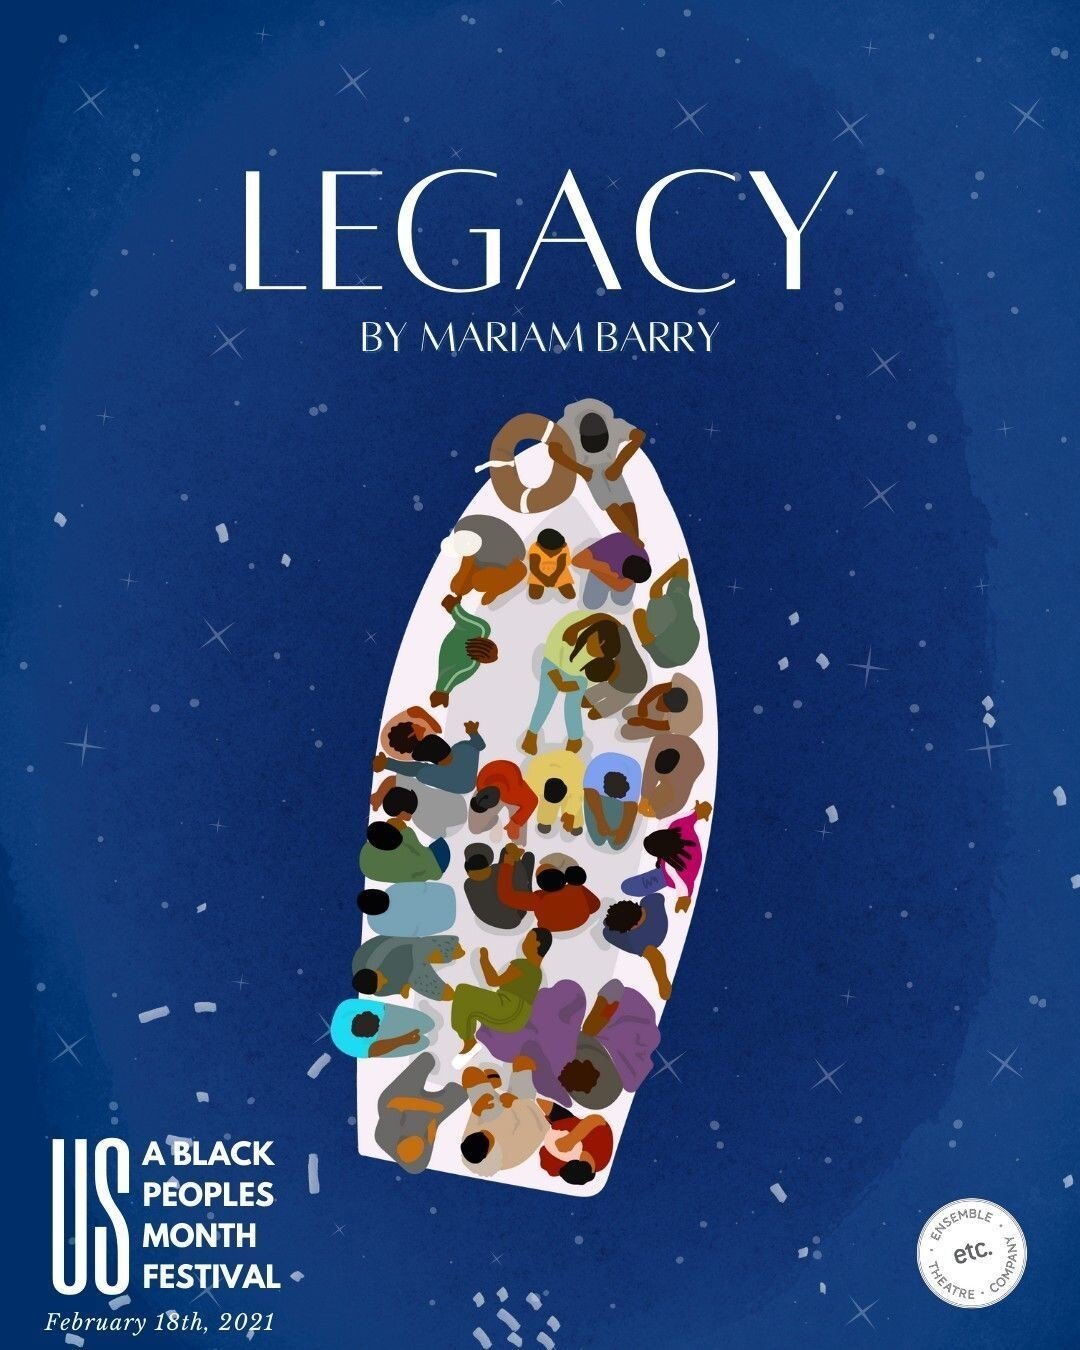 Do you see Us? 👁️ Presented by ETC as part of #UsFestival2021, Legacy created by Mariam Barry is online February 18th. Legacy is an international independent short film based on real events, exploring the migrant crisis through the lens of modern Af